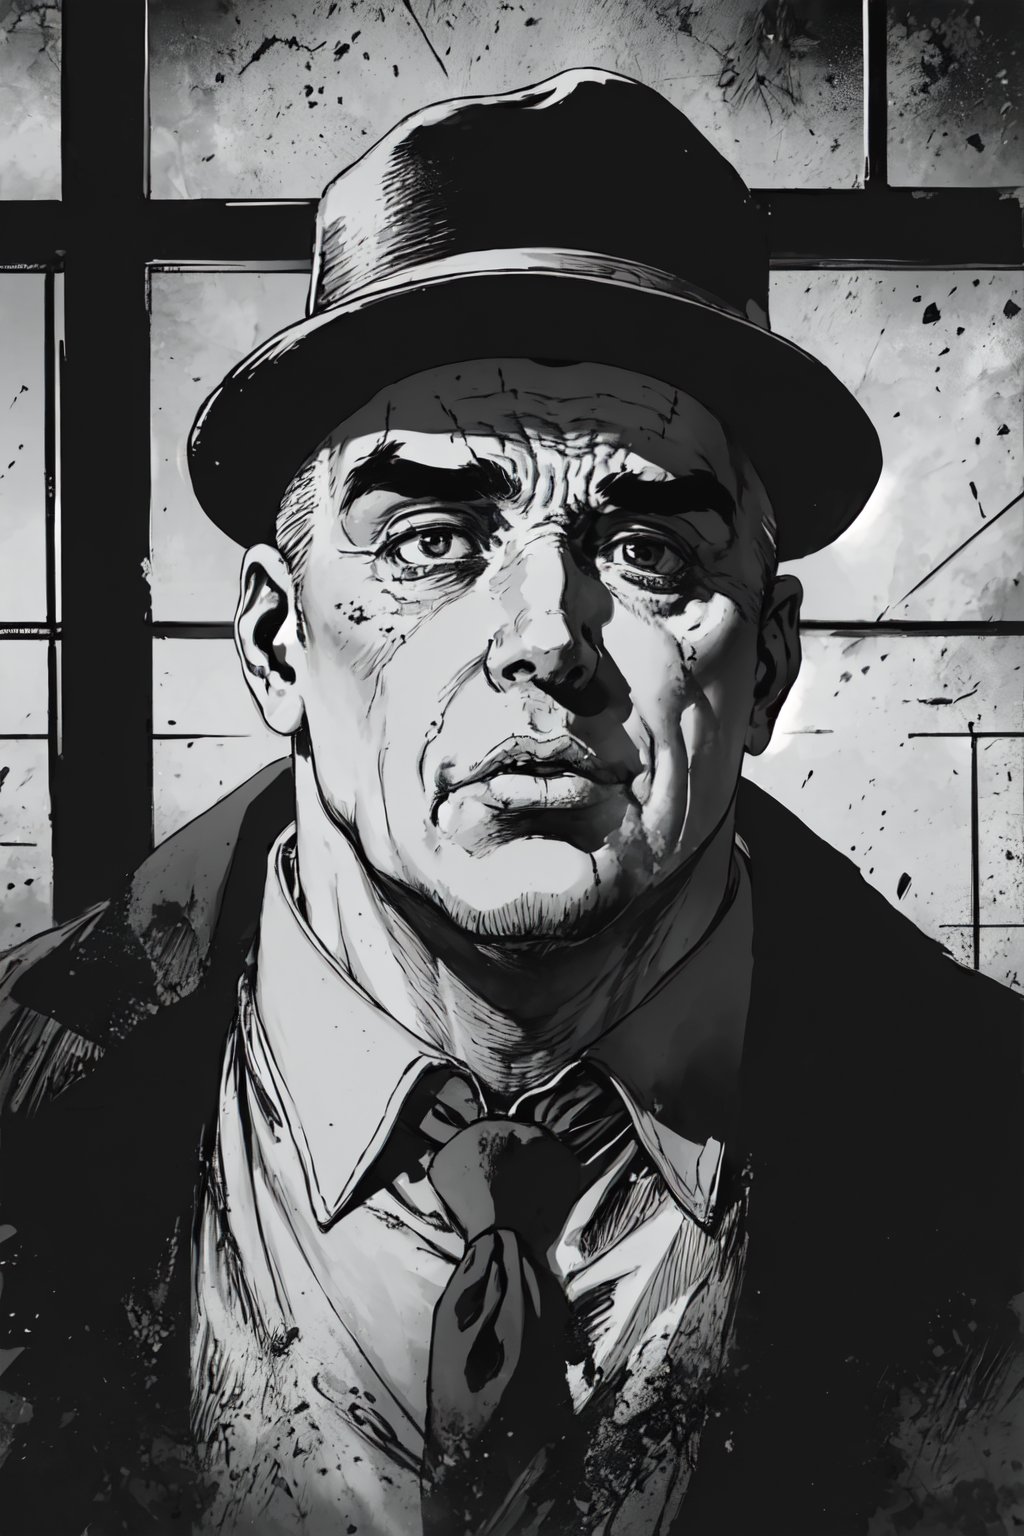 boichi manga style, monochrome, greyscale, he is Chicago gangster Al Capone, locked in a cell, looking out through the bars, with a chubby face, thick eyebrows, big eyes, big mouth and thick lips, scars on his cheeks, vicious Face, holding a cigar, wearing a round hat, tall and fat, wearing prisoner's clothing, ((masterpiece))